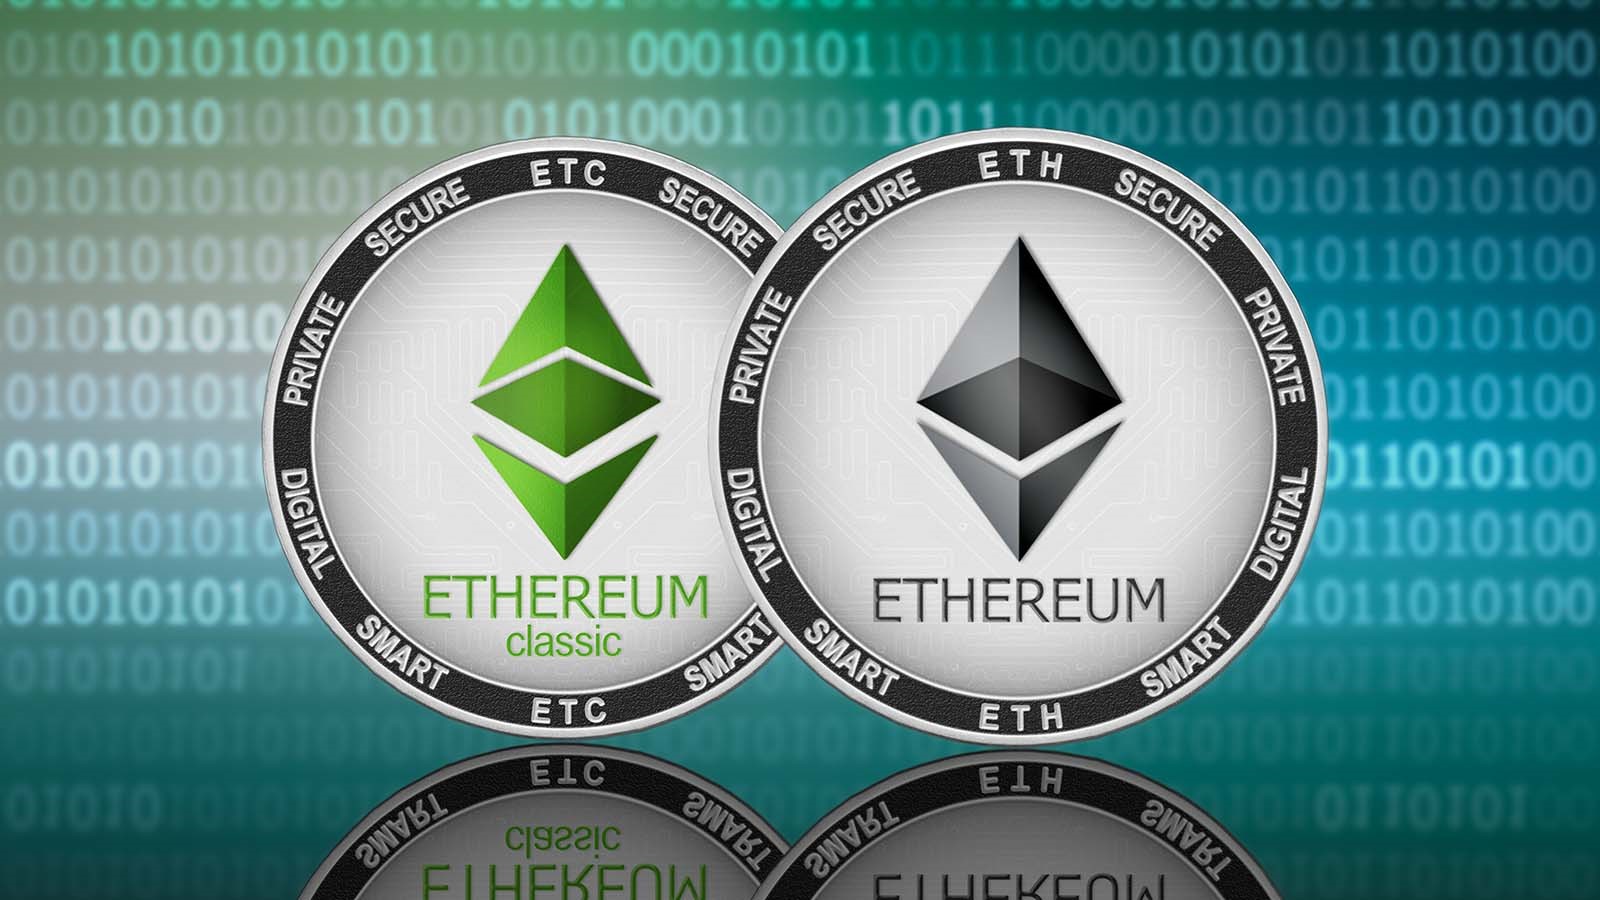 what is ethereum classic and how is it separated from ethereum